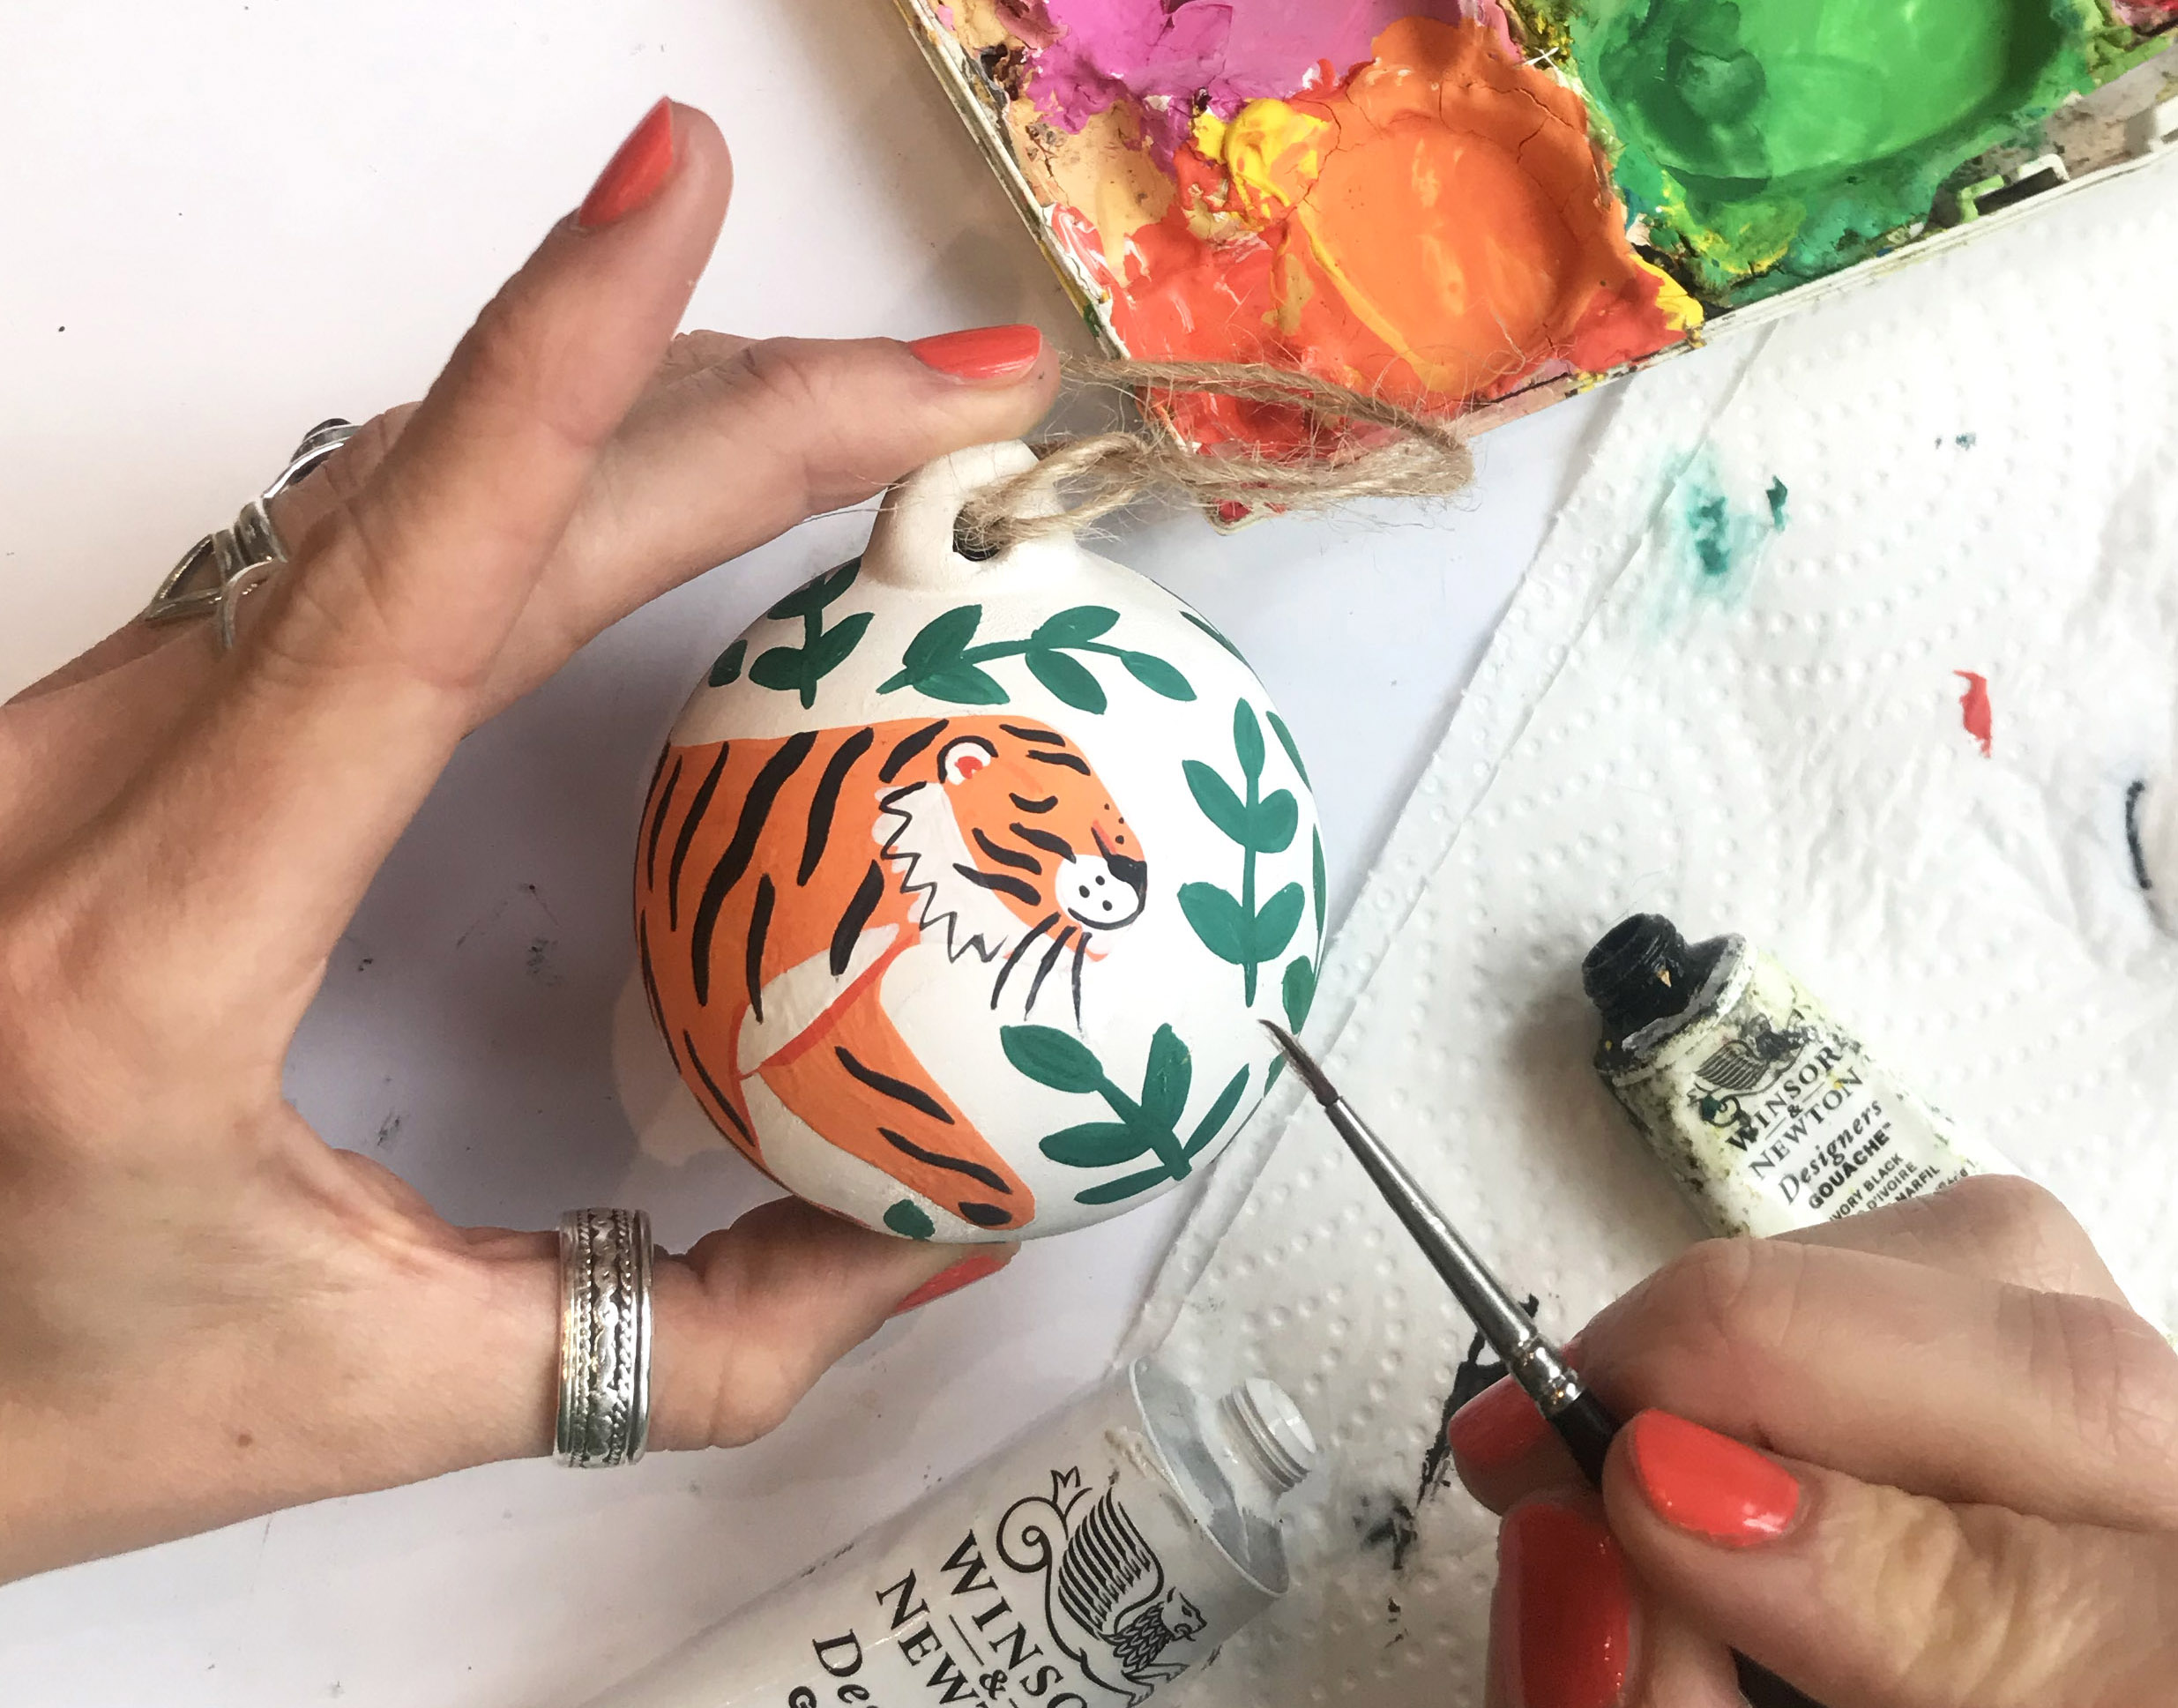 Tiger in the Jungle Christmas Ceramic Bauble